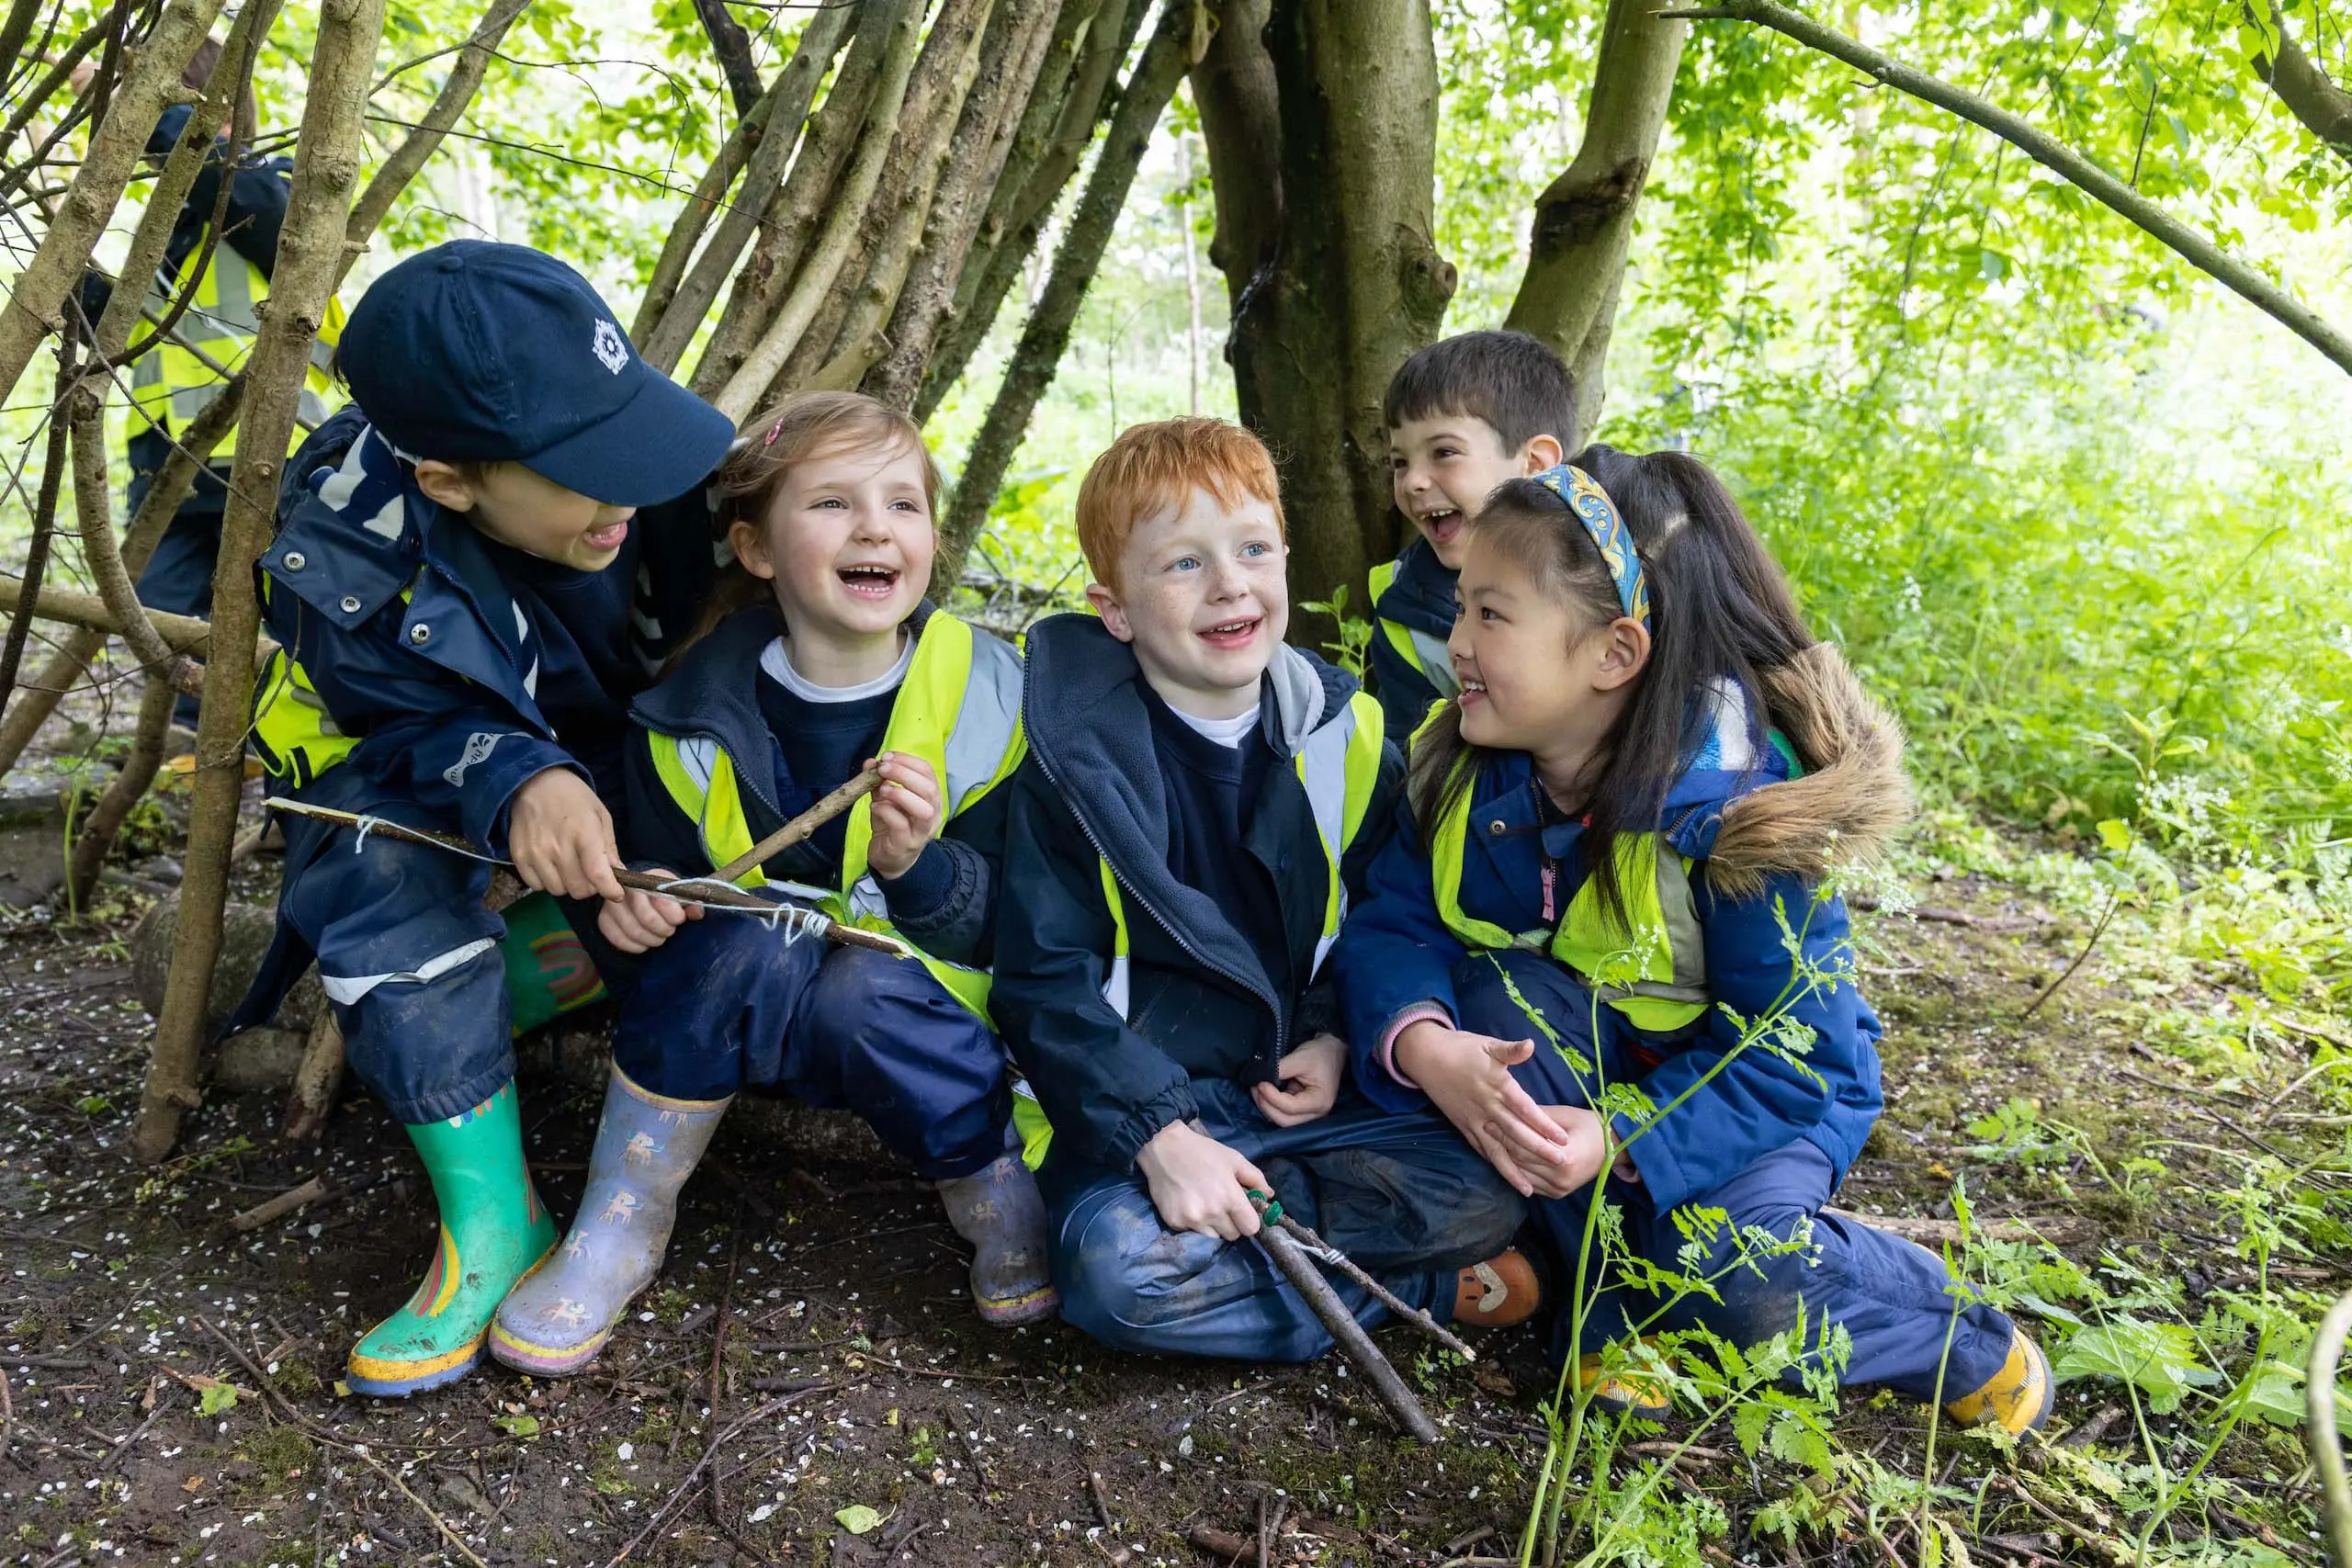 KES Bath pupils in forest under tree